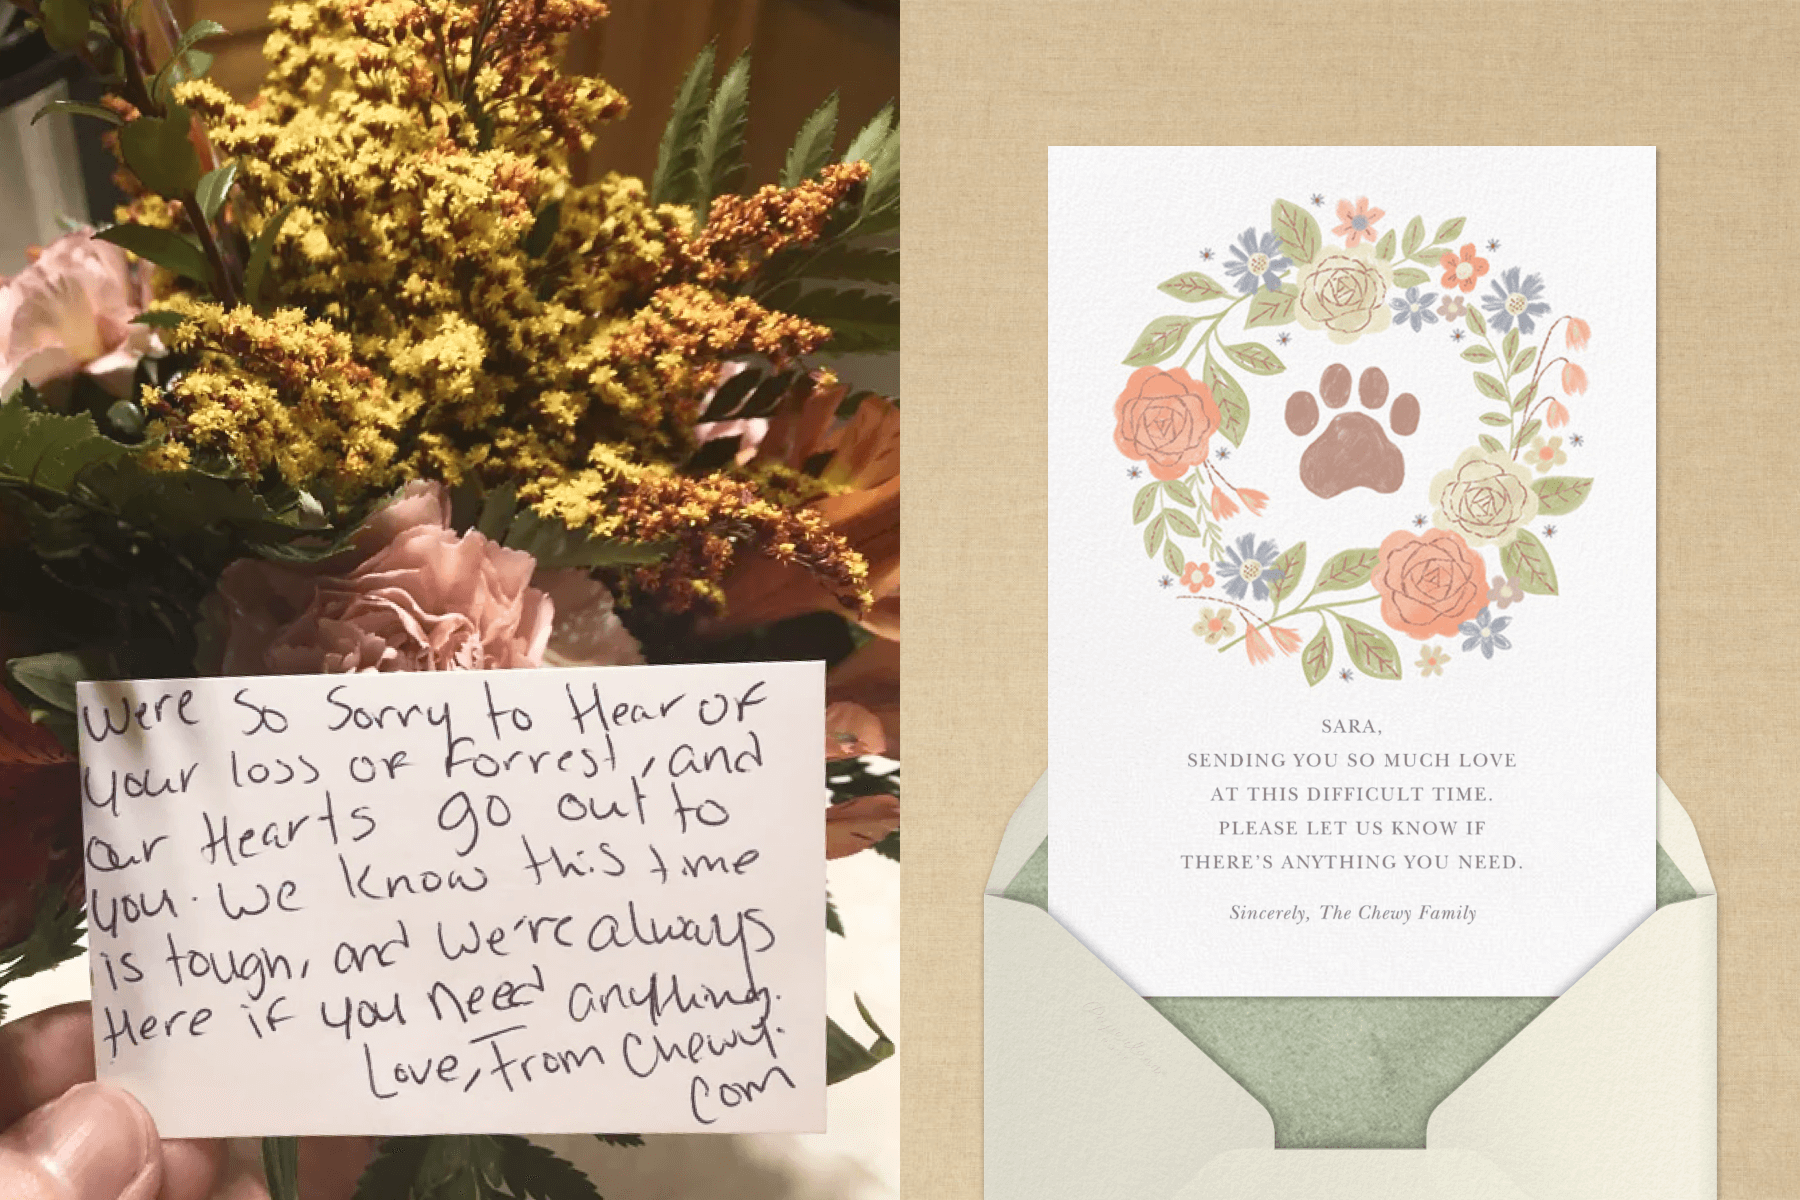 Left: A handwritten condolence letter and flowers; Right: A pet condolence card with a floral motif.